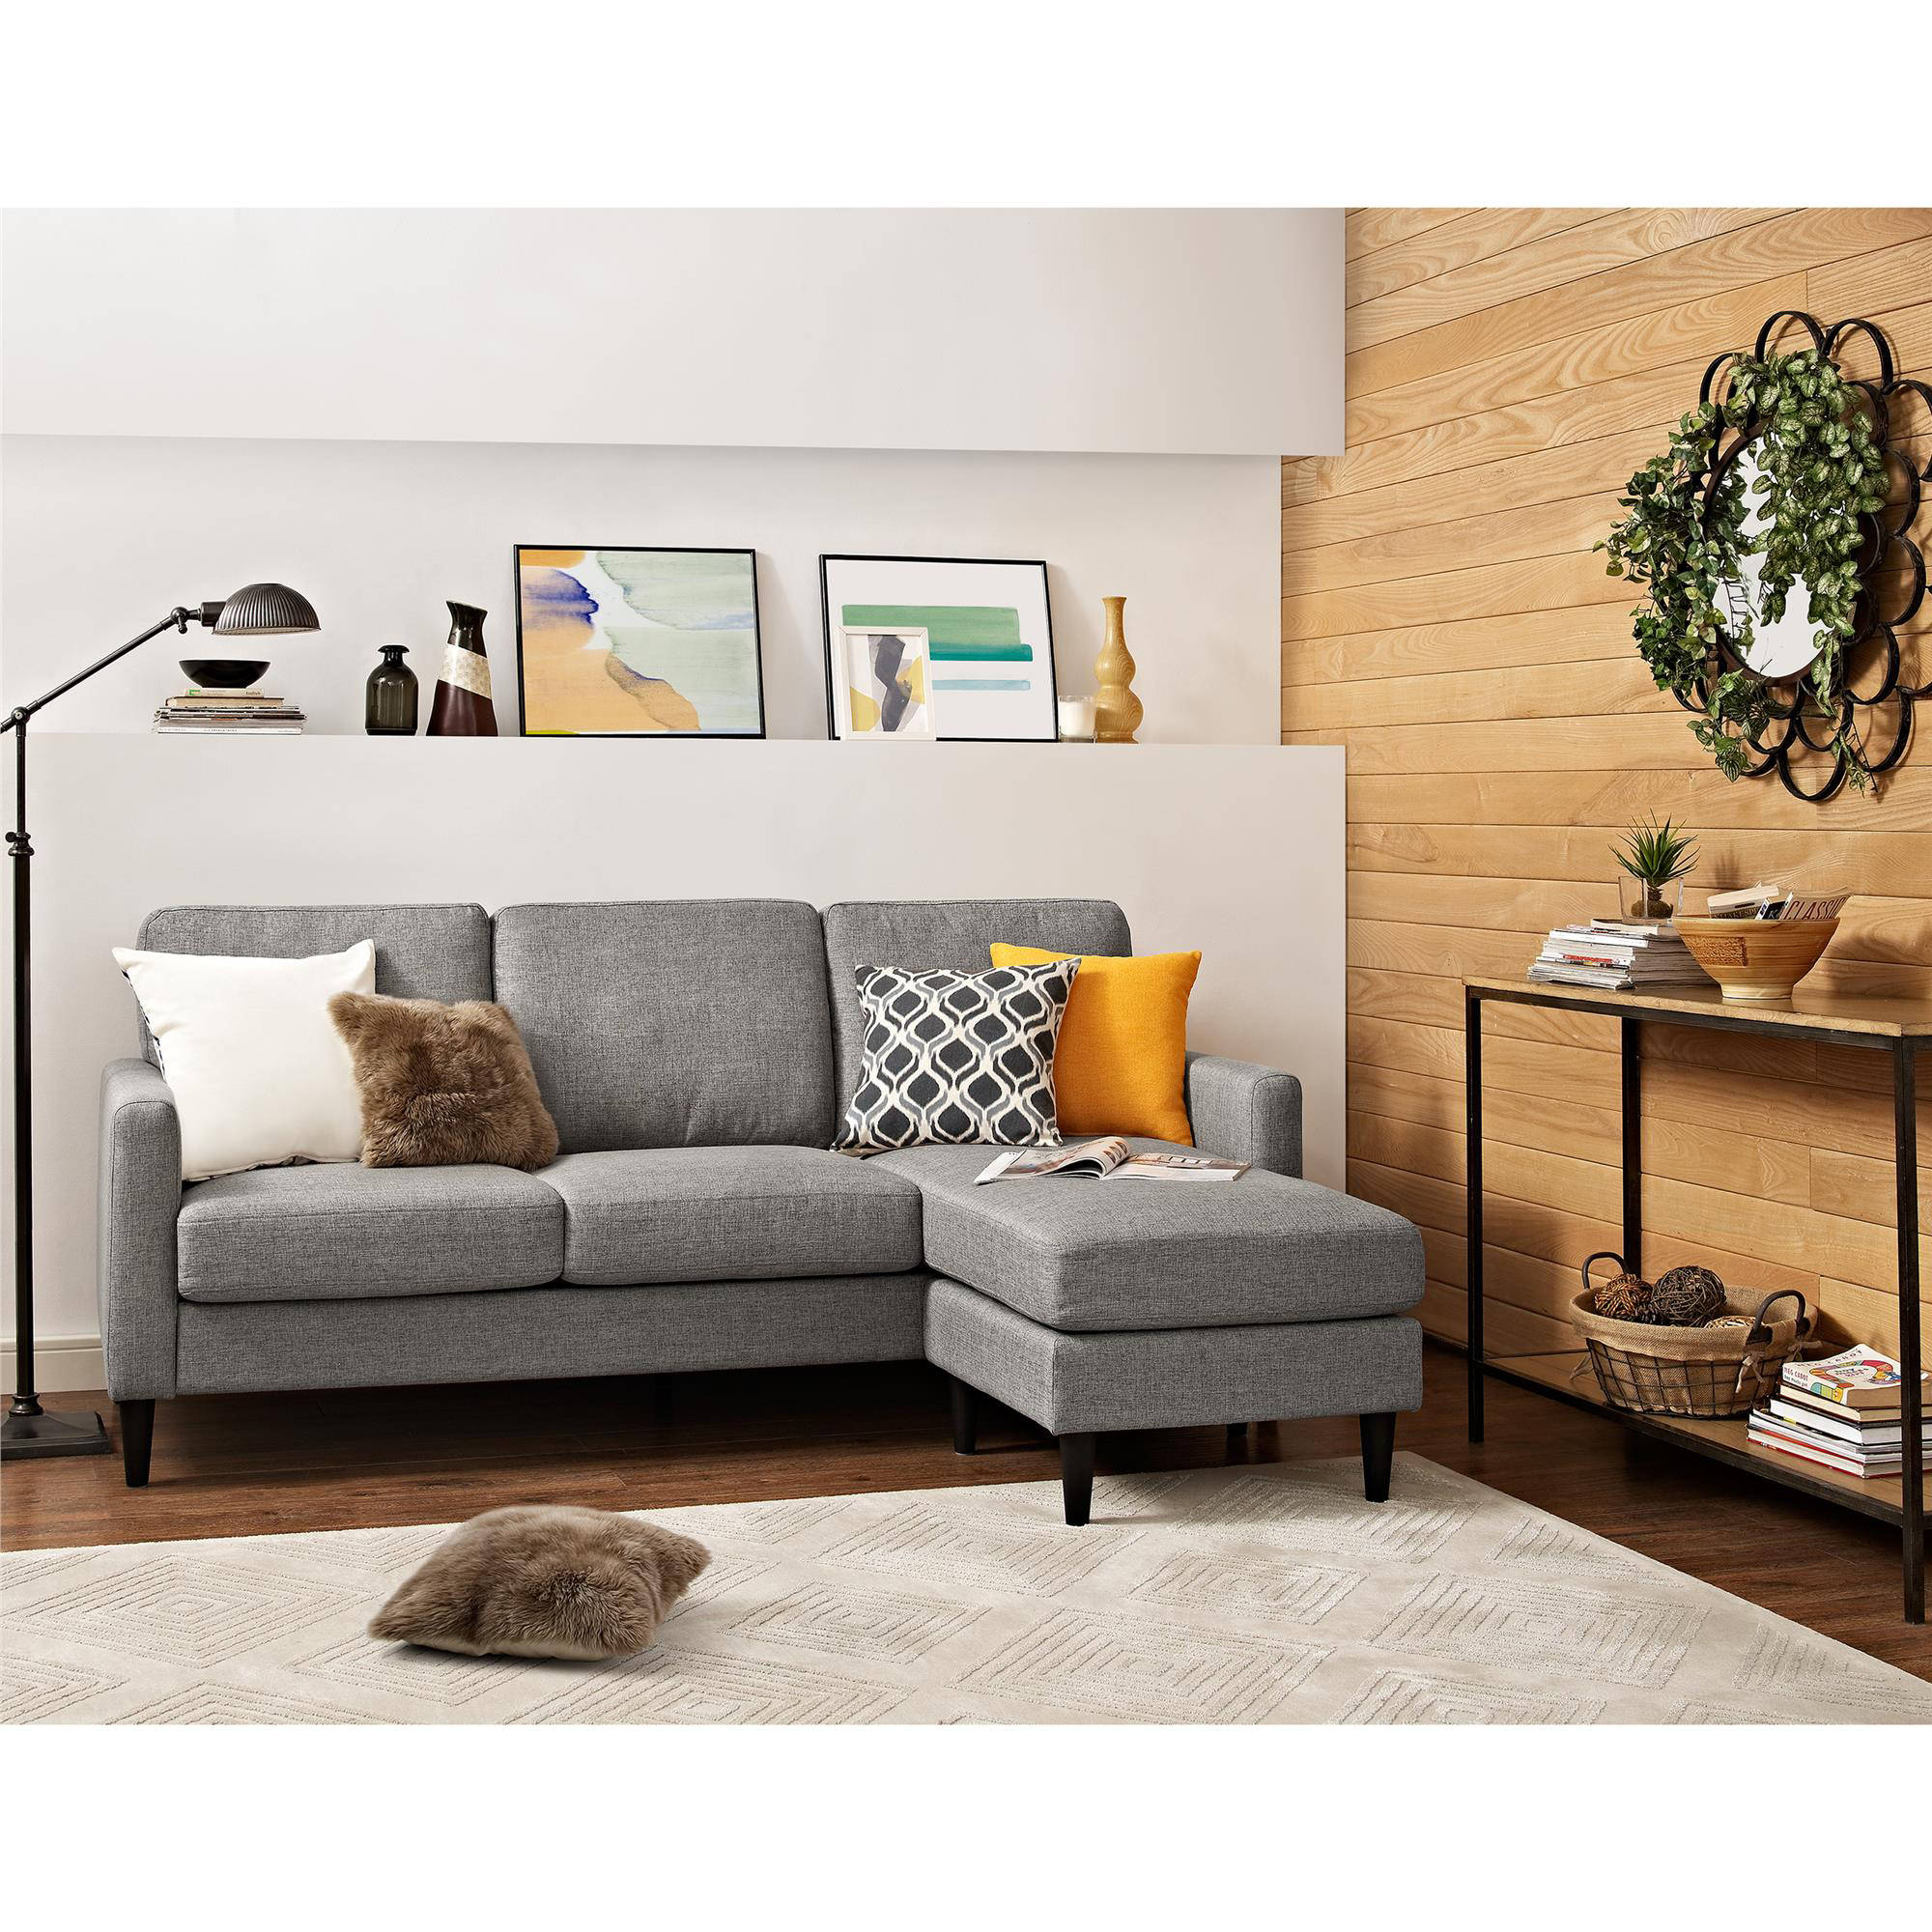 Dorel Living Kaci Reversible Contemporary Upholstered Sectional, Gray - image 1 of 10